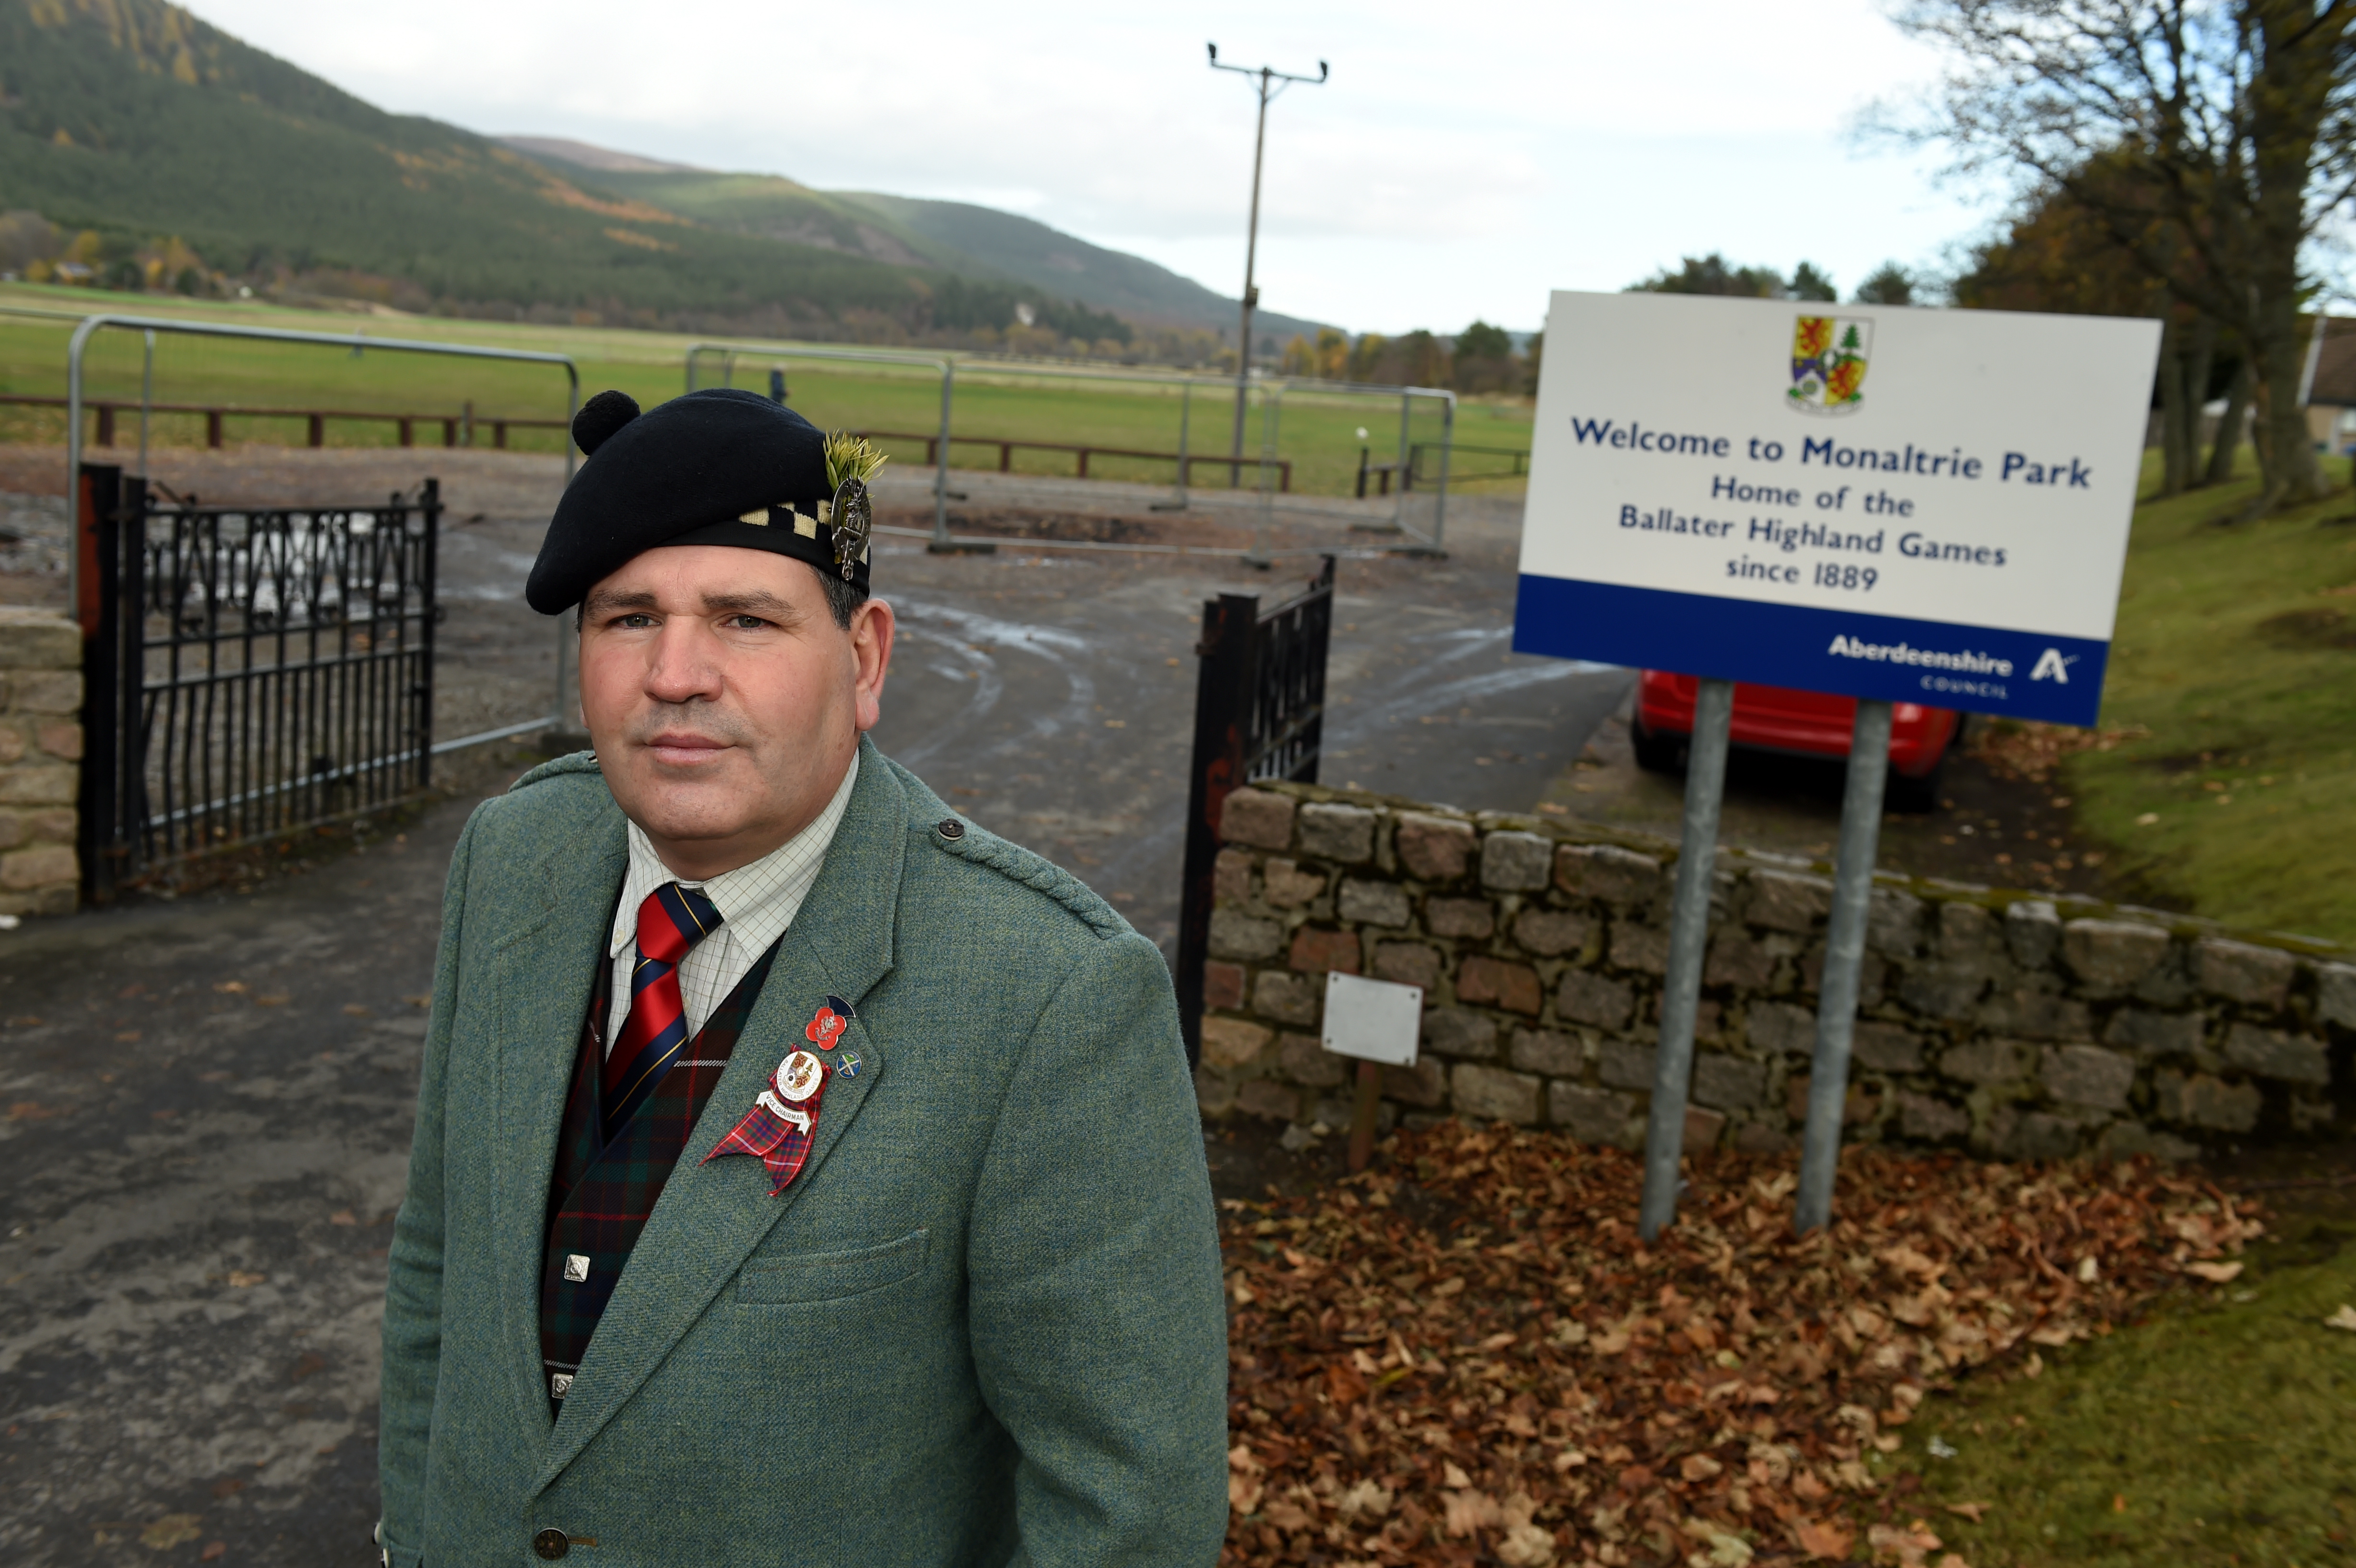 Ballater highland games vice chairman Scott Fraser is appealing for archive materials from the games.